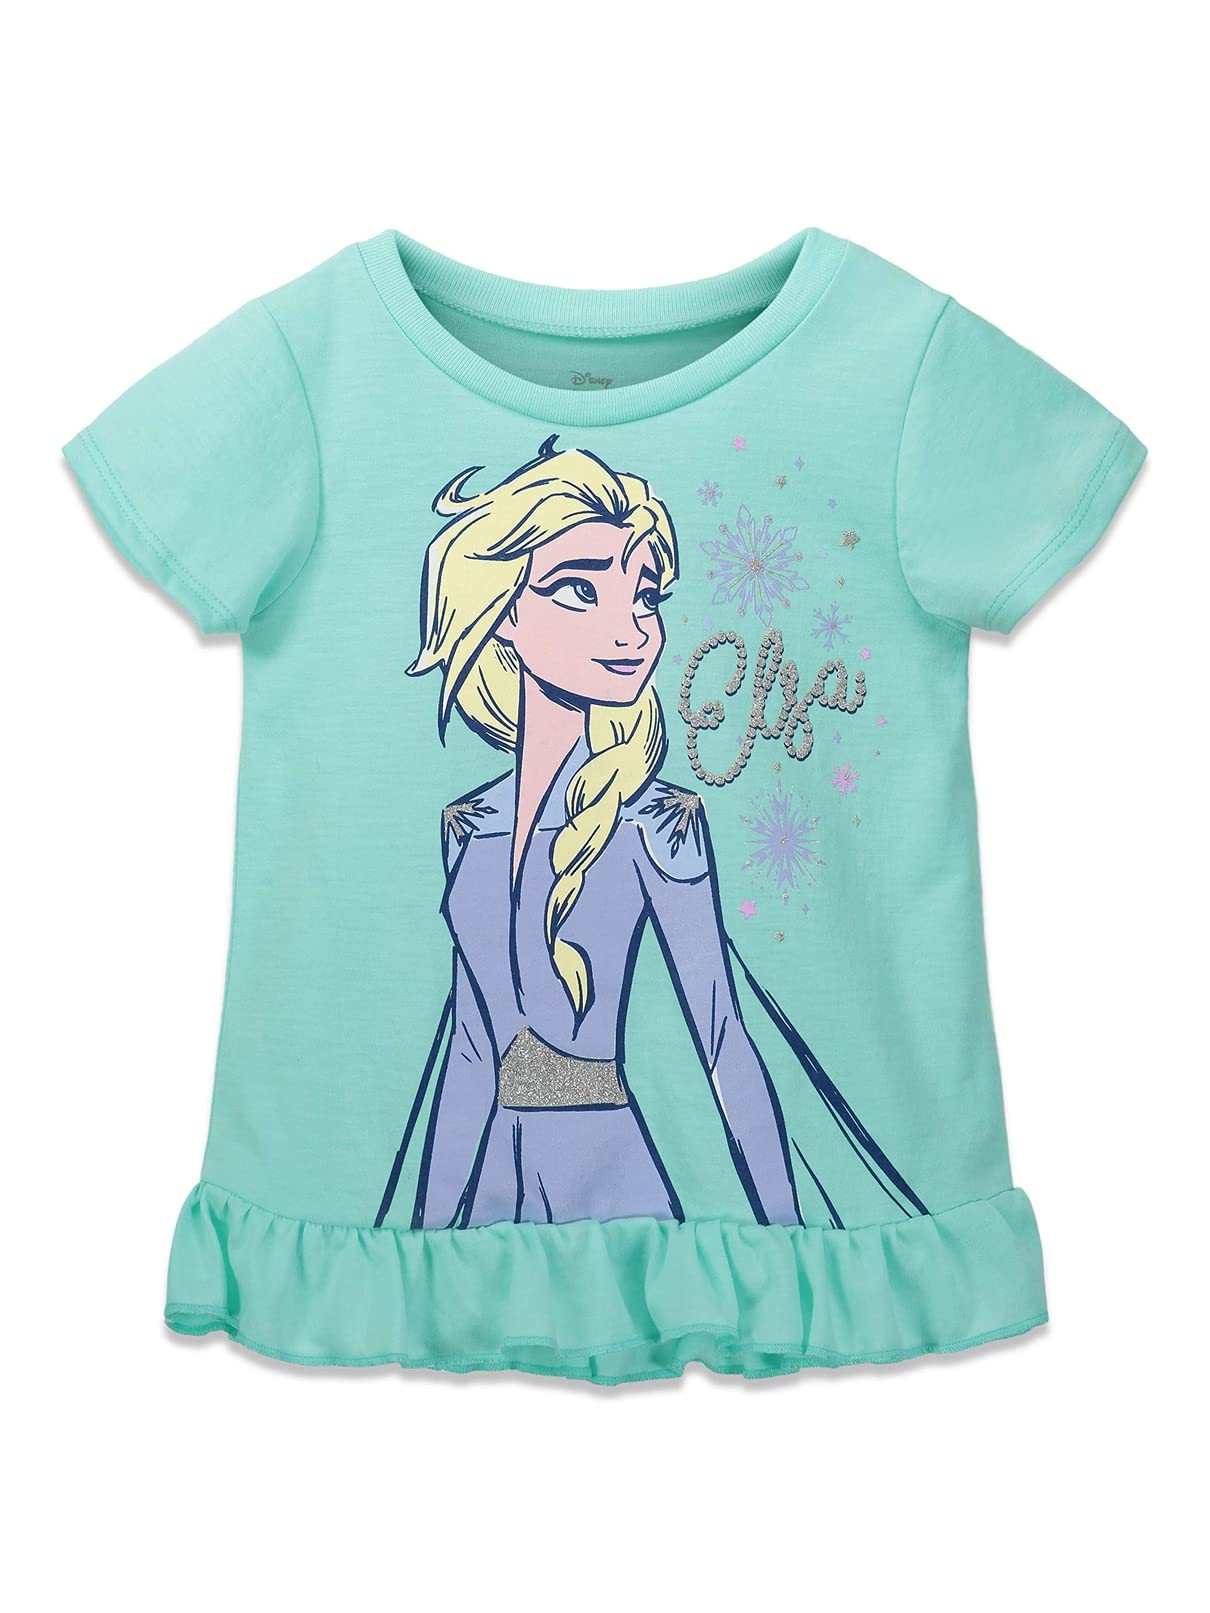 Disney Princess Cinderella Frozen Moana Raya Little Mermaid T-Shirt and French Terry Shorts Outfit Set Infant to Big Kid